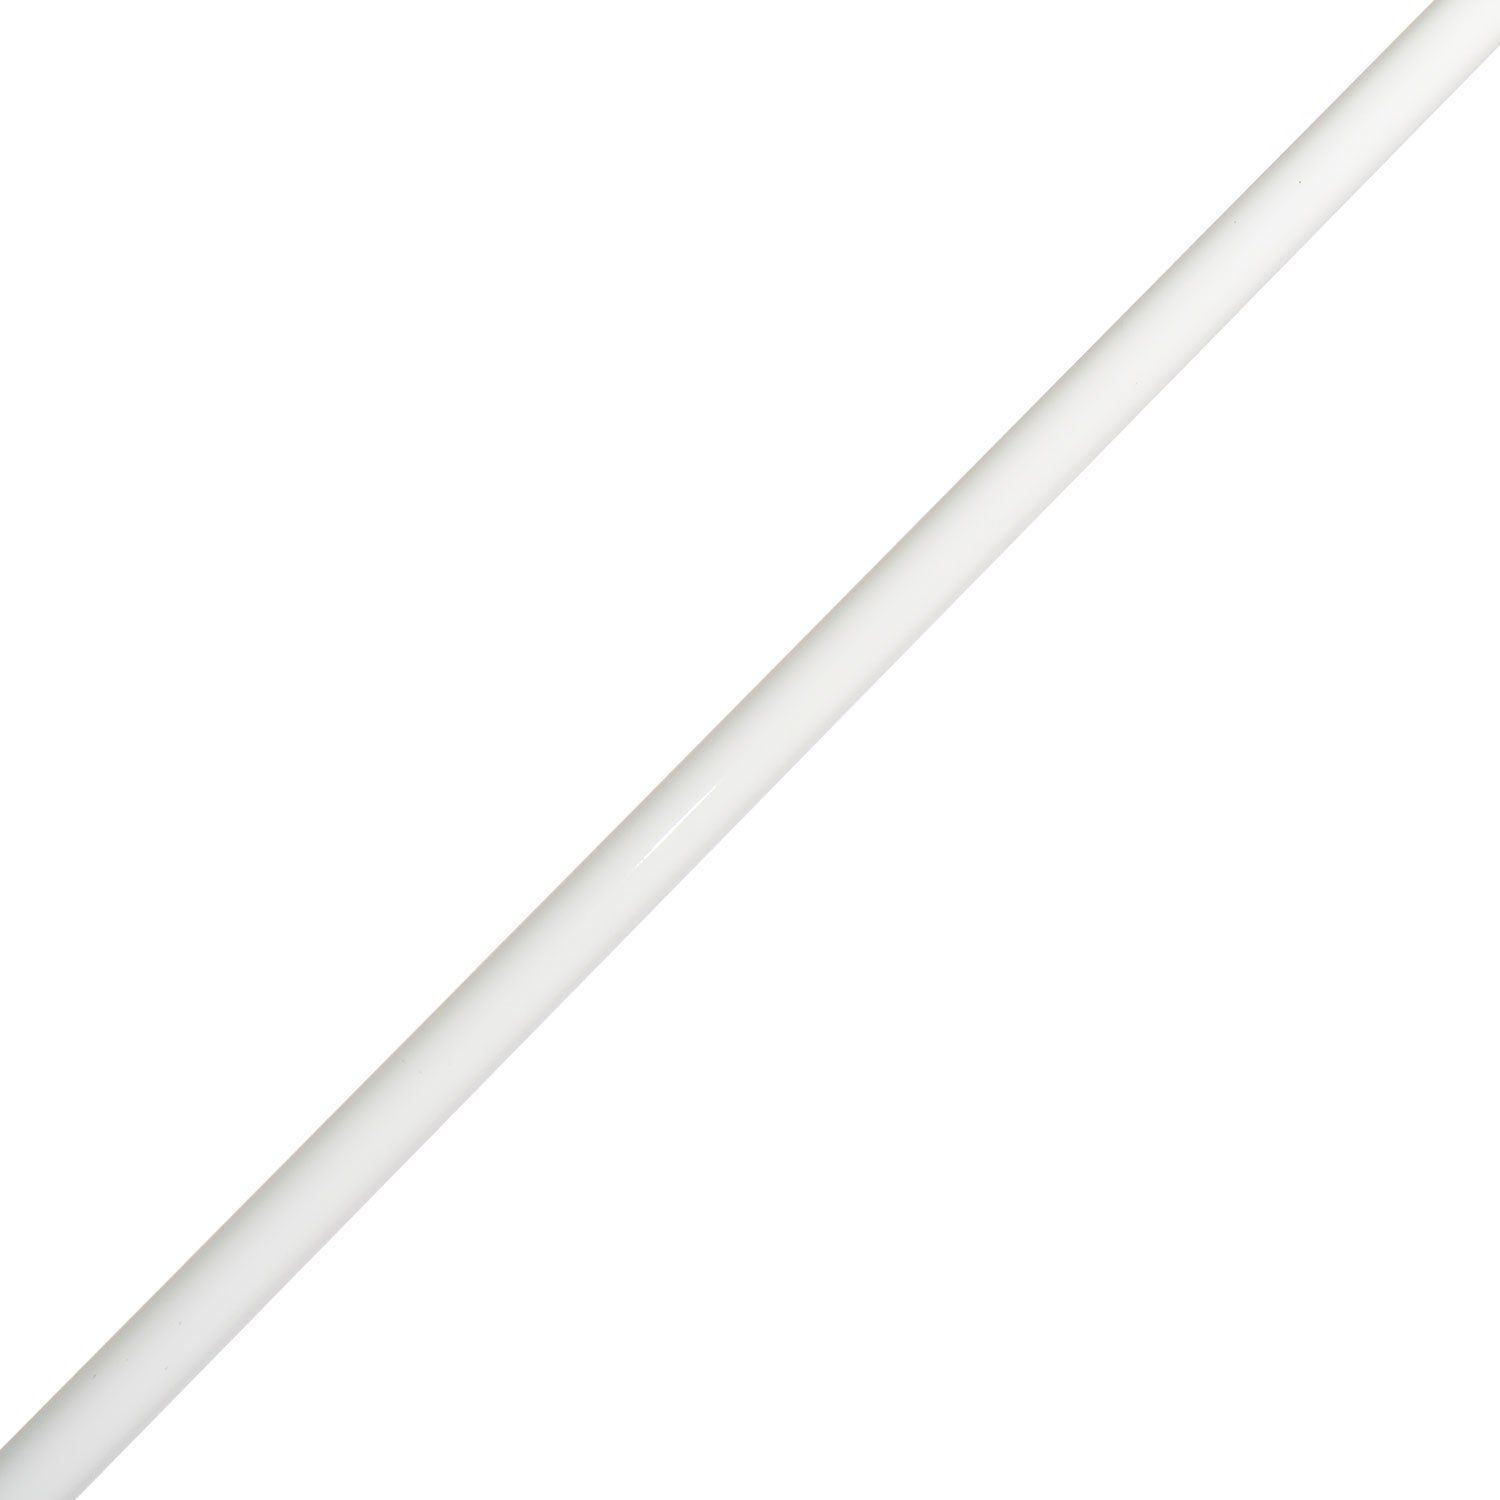 CRB 5'6" Light Color Series Rod Blank - IS561L